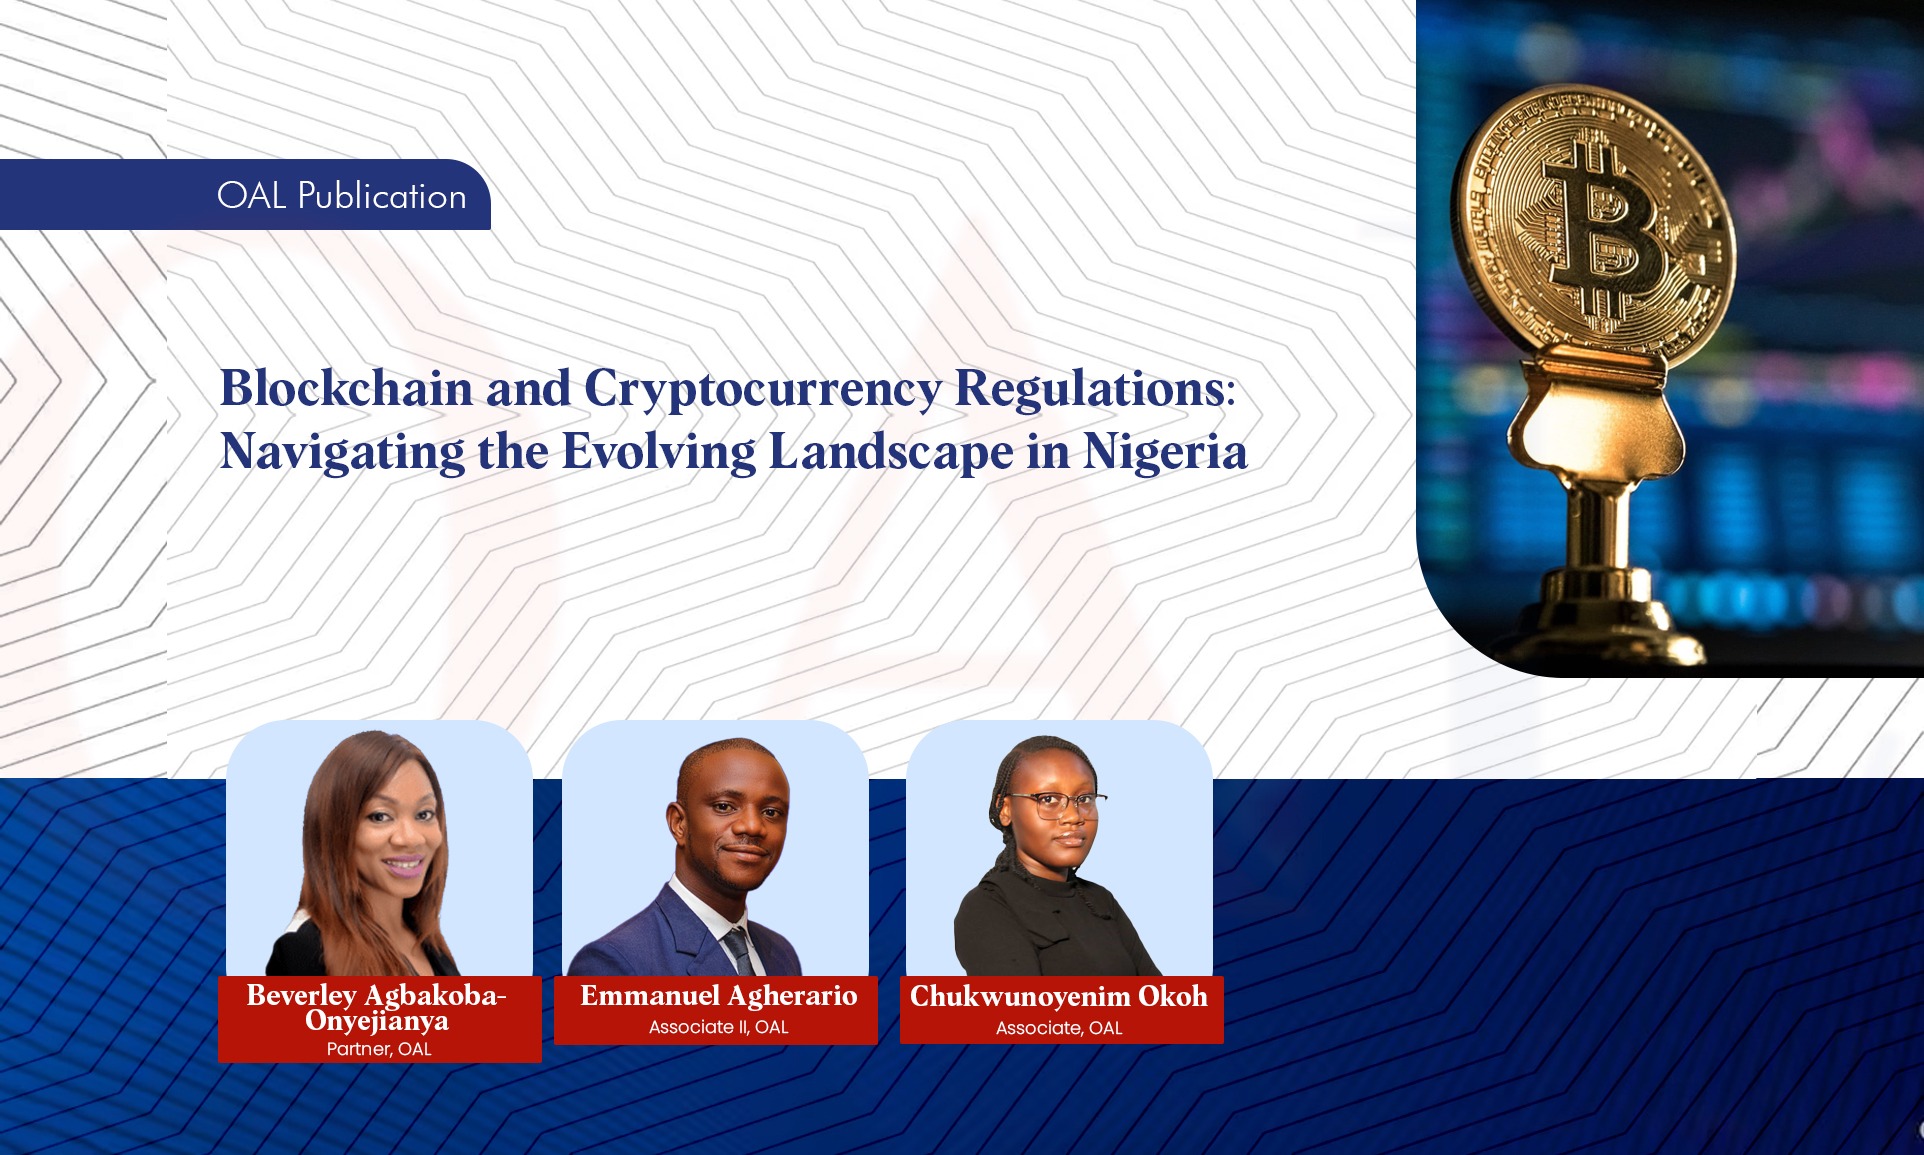 Blockchain and Cryptocurrency Regulations - Navigating the Evolving Landscape in Nigeria